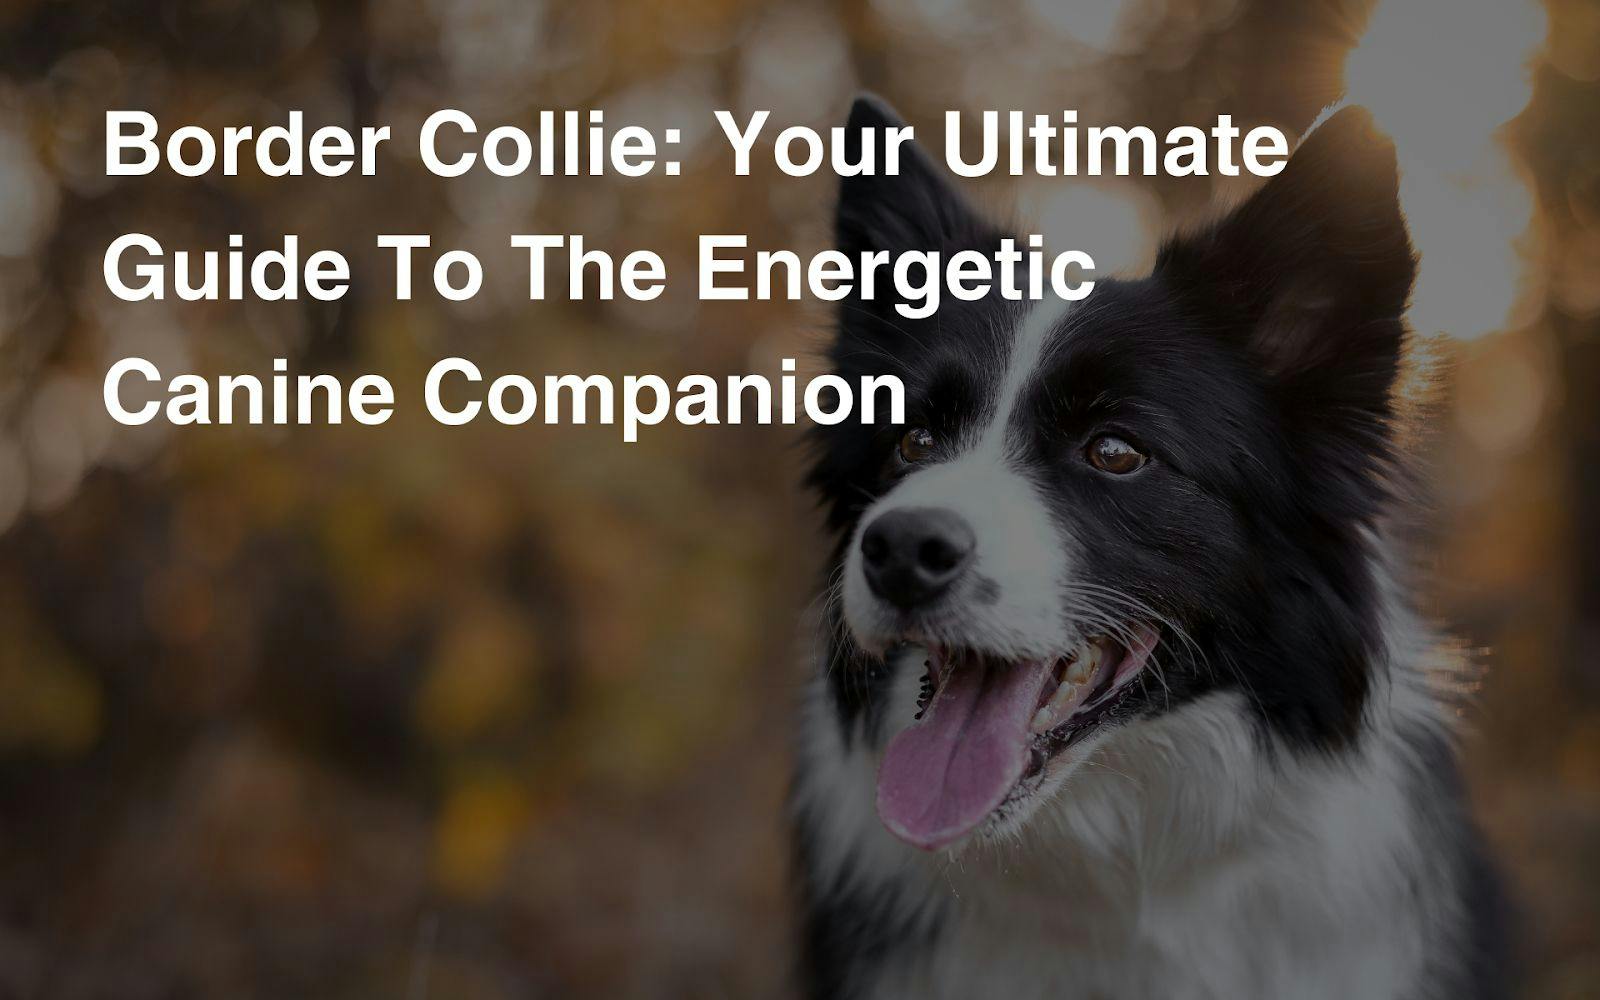 Border Collie: Your Ultimate Guide To The Energetic Canine Companion